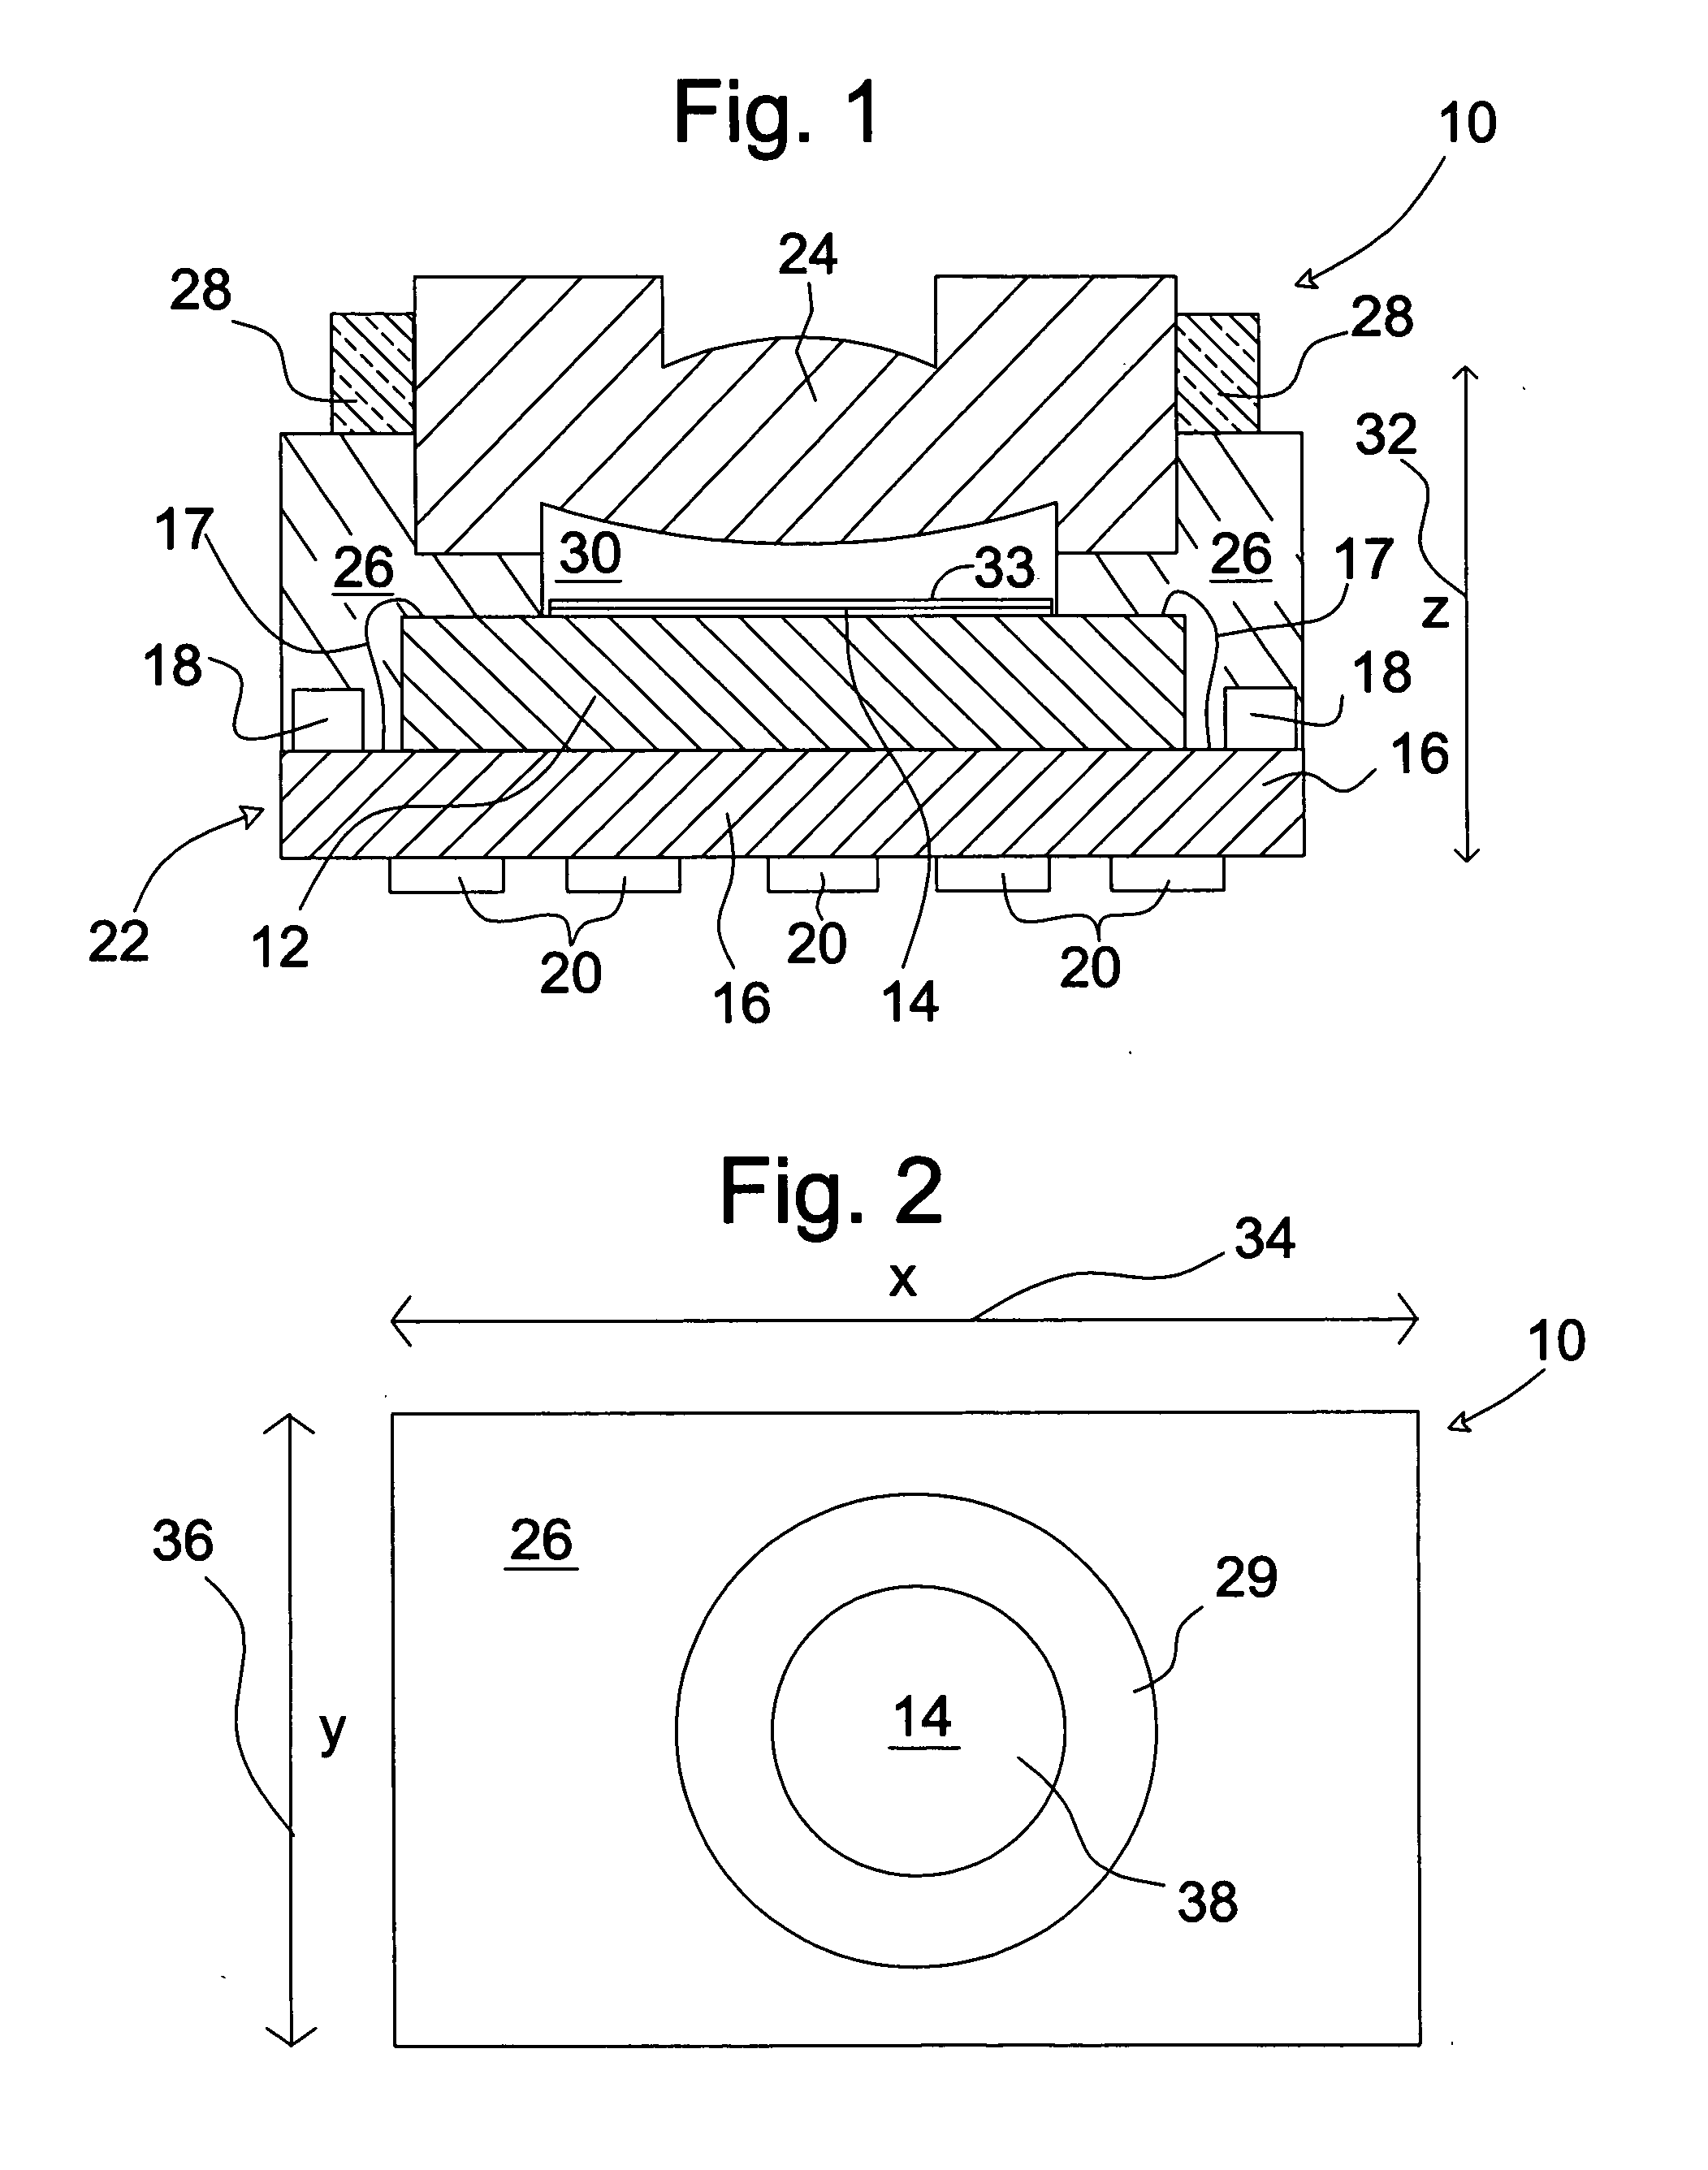 Integrated lens and chip assembly for a digital camera